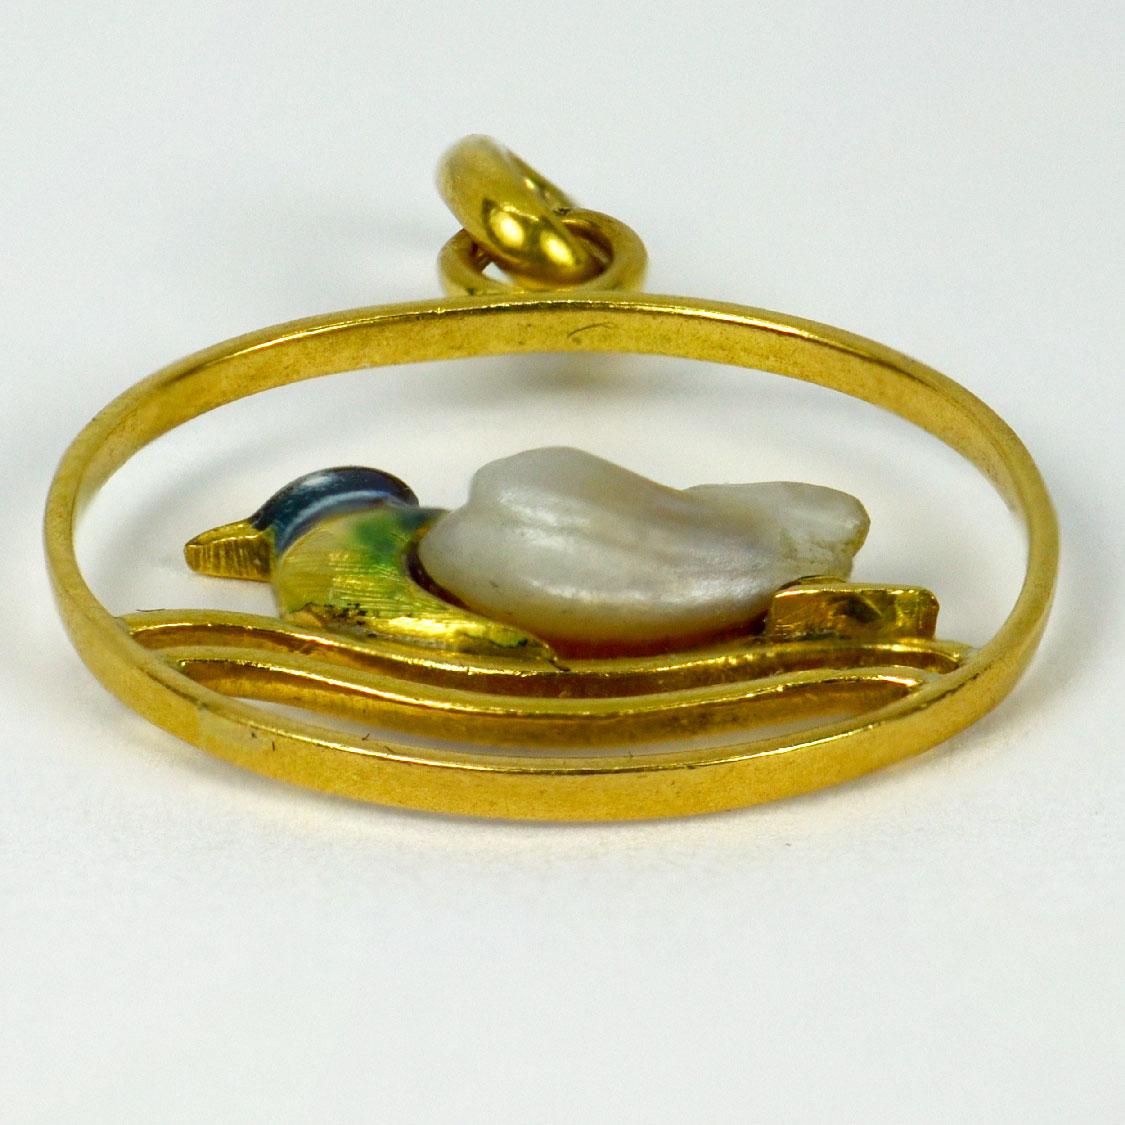 A French 18 karat (18K) yellow gold charm pendant designed as a duck on enamel water, the body represented by a baroque pearl. Stamped with the eagles head for French manufacture and 18 karat gold with an unknown maker’s mark.

Dimensions: 2.1 x 1.8